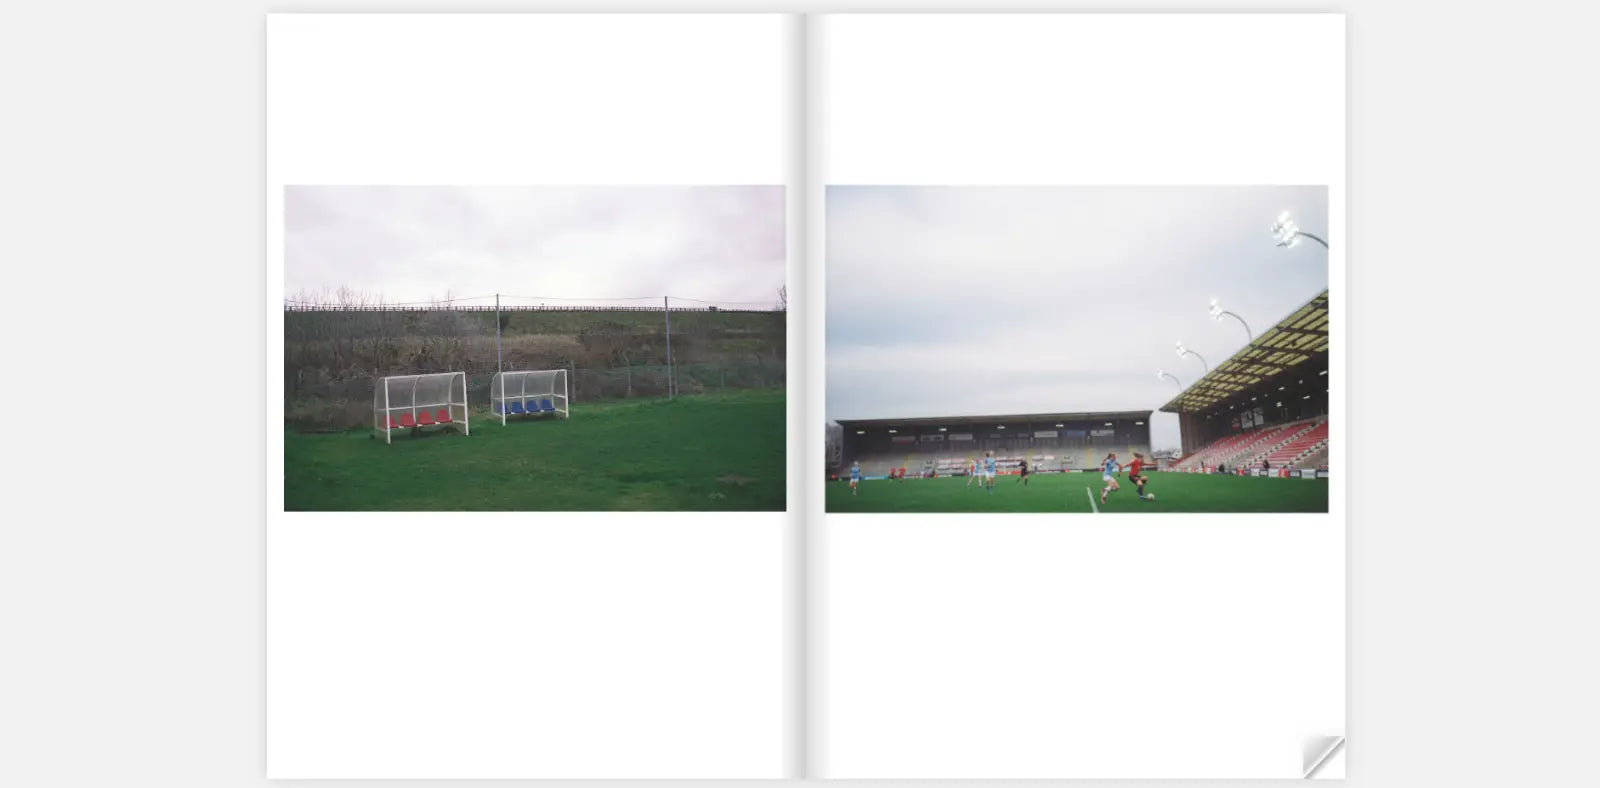 Two-page spread from the zine "The Women's Game" by Claire Wray. The left page features two empty football dugouts with red and blue seats on a grassy field, set against a background of a hillside and a fence. The right page shows a football match in progress at a stadium, with players in action on the field and a partially filled stand with red seats and overhead lights.